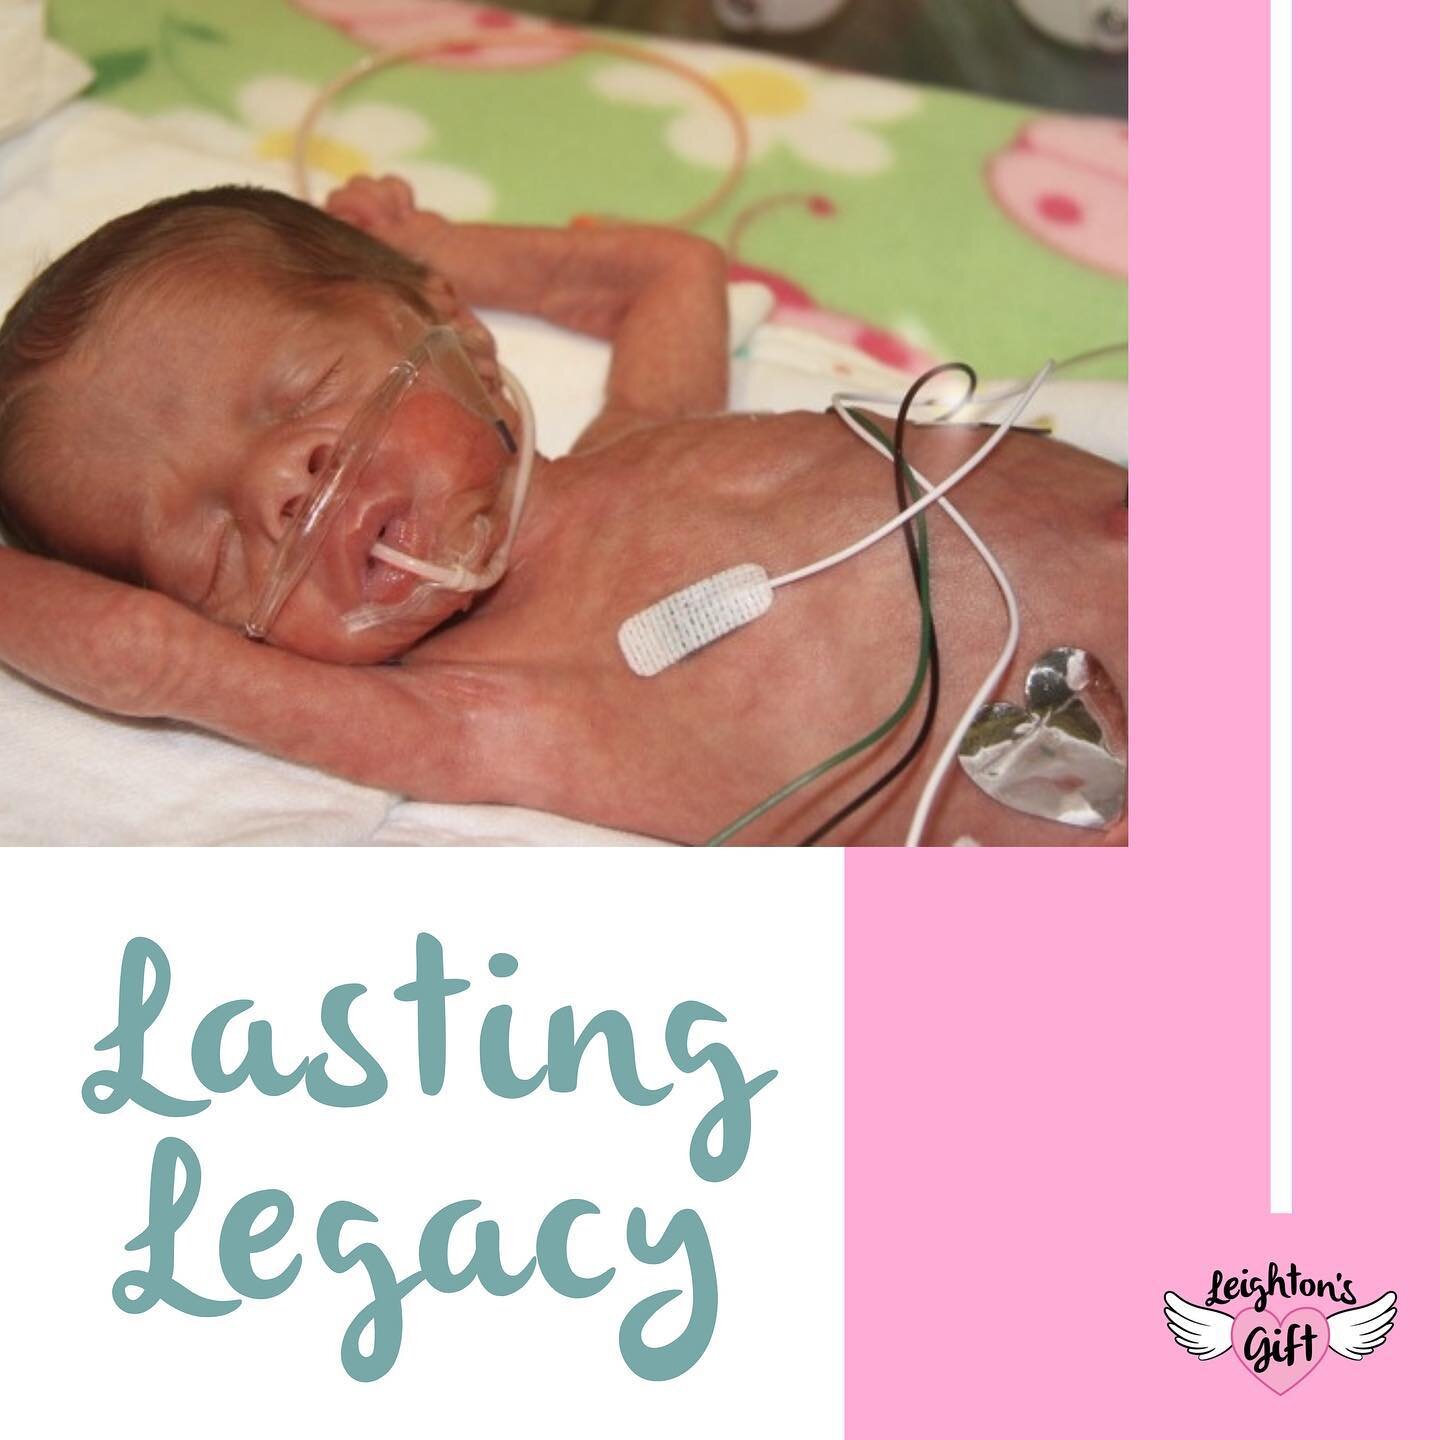 The need for better connection while in the NICU, and Chris and Amy's desire to create a lasting legacy for Leighton, were the main driving force behind the creation of the nonprofit.